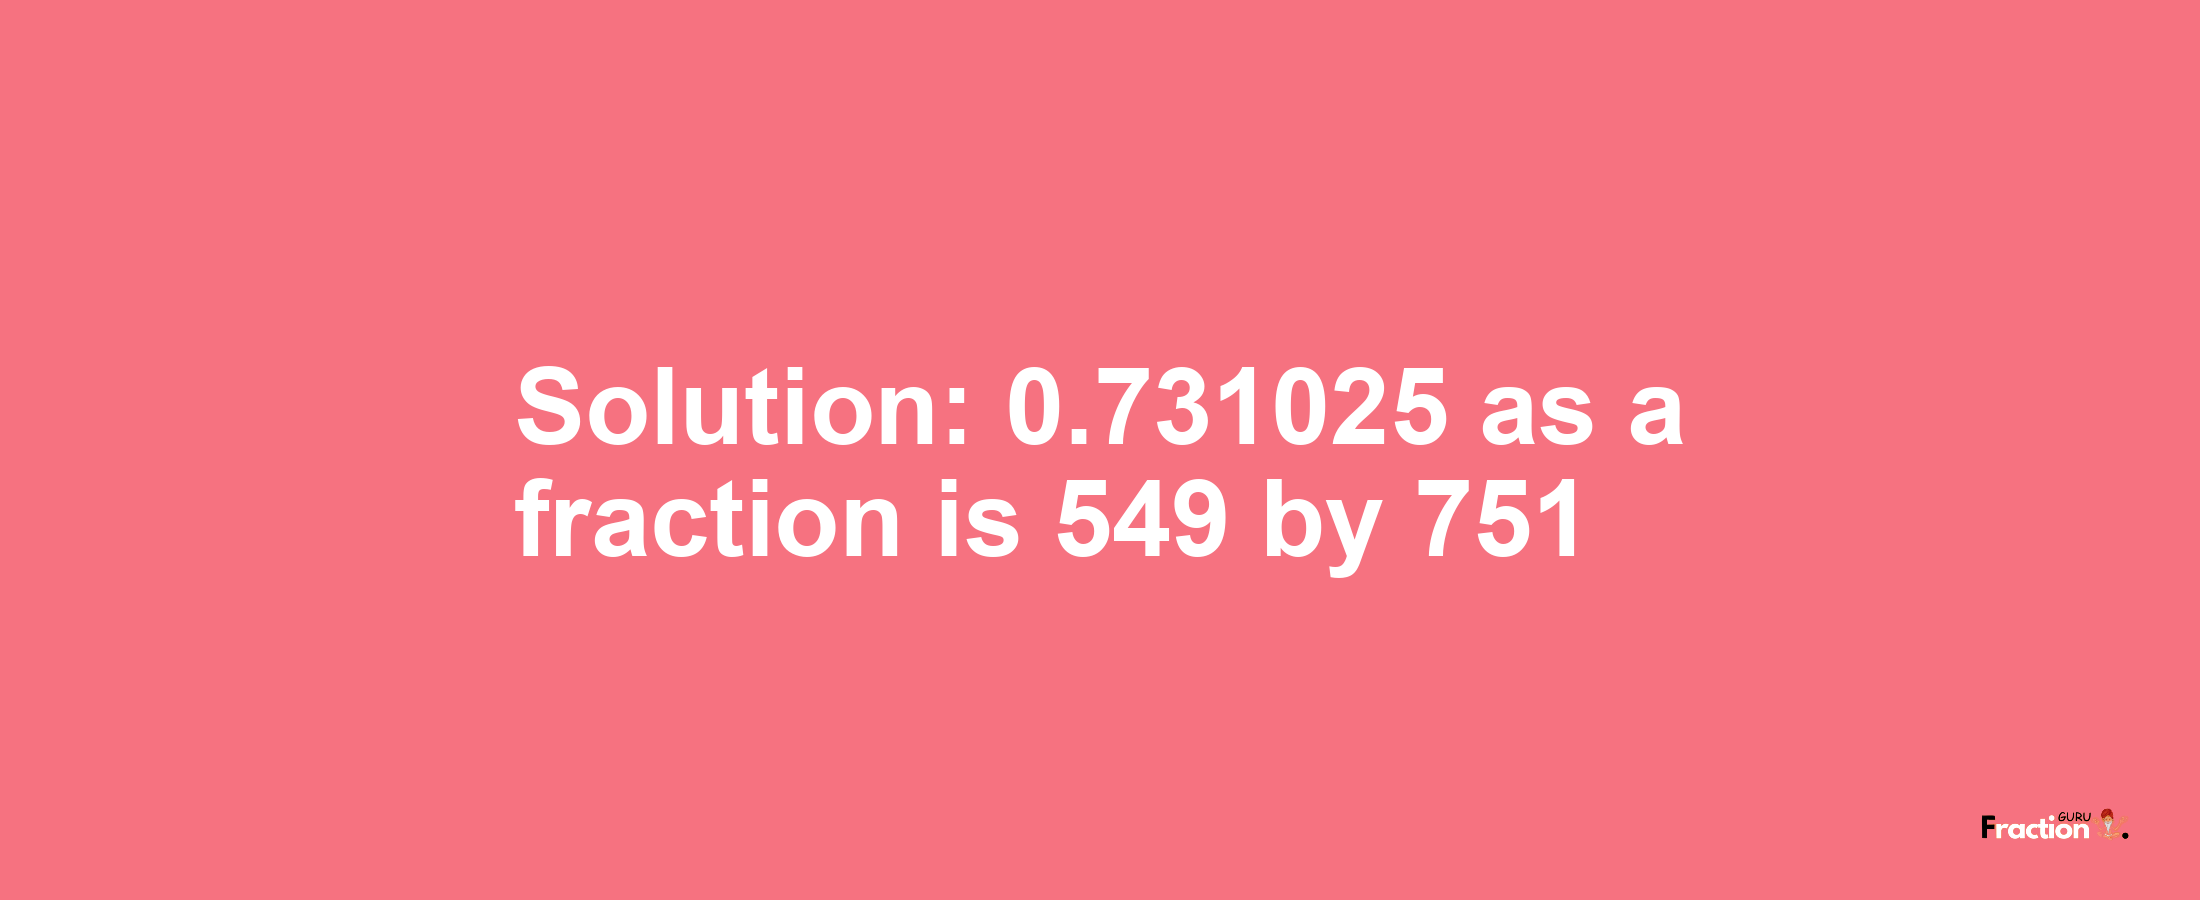 Solution:0.731025 as a fraction is 549/751